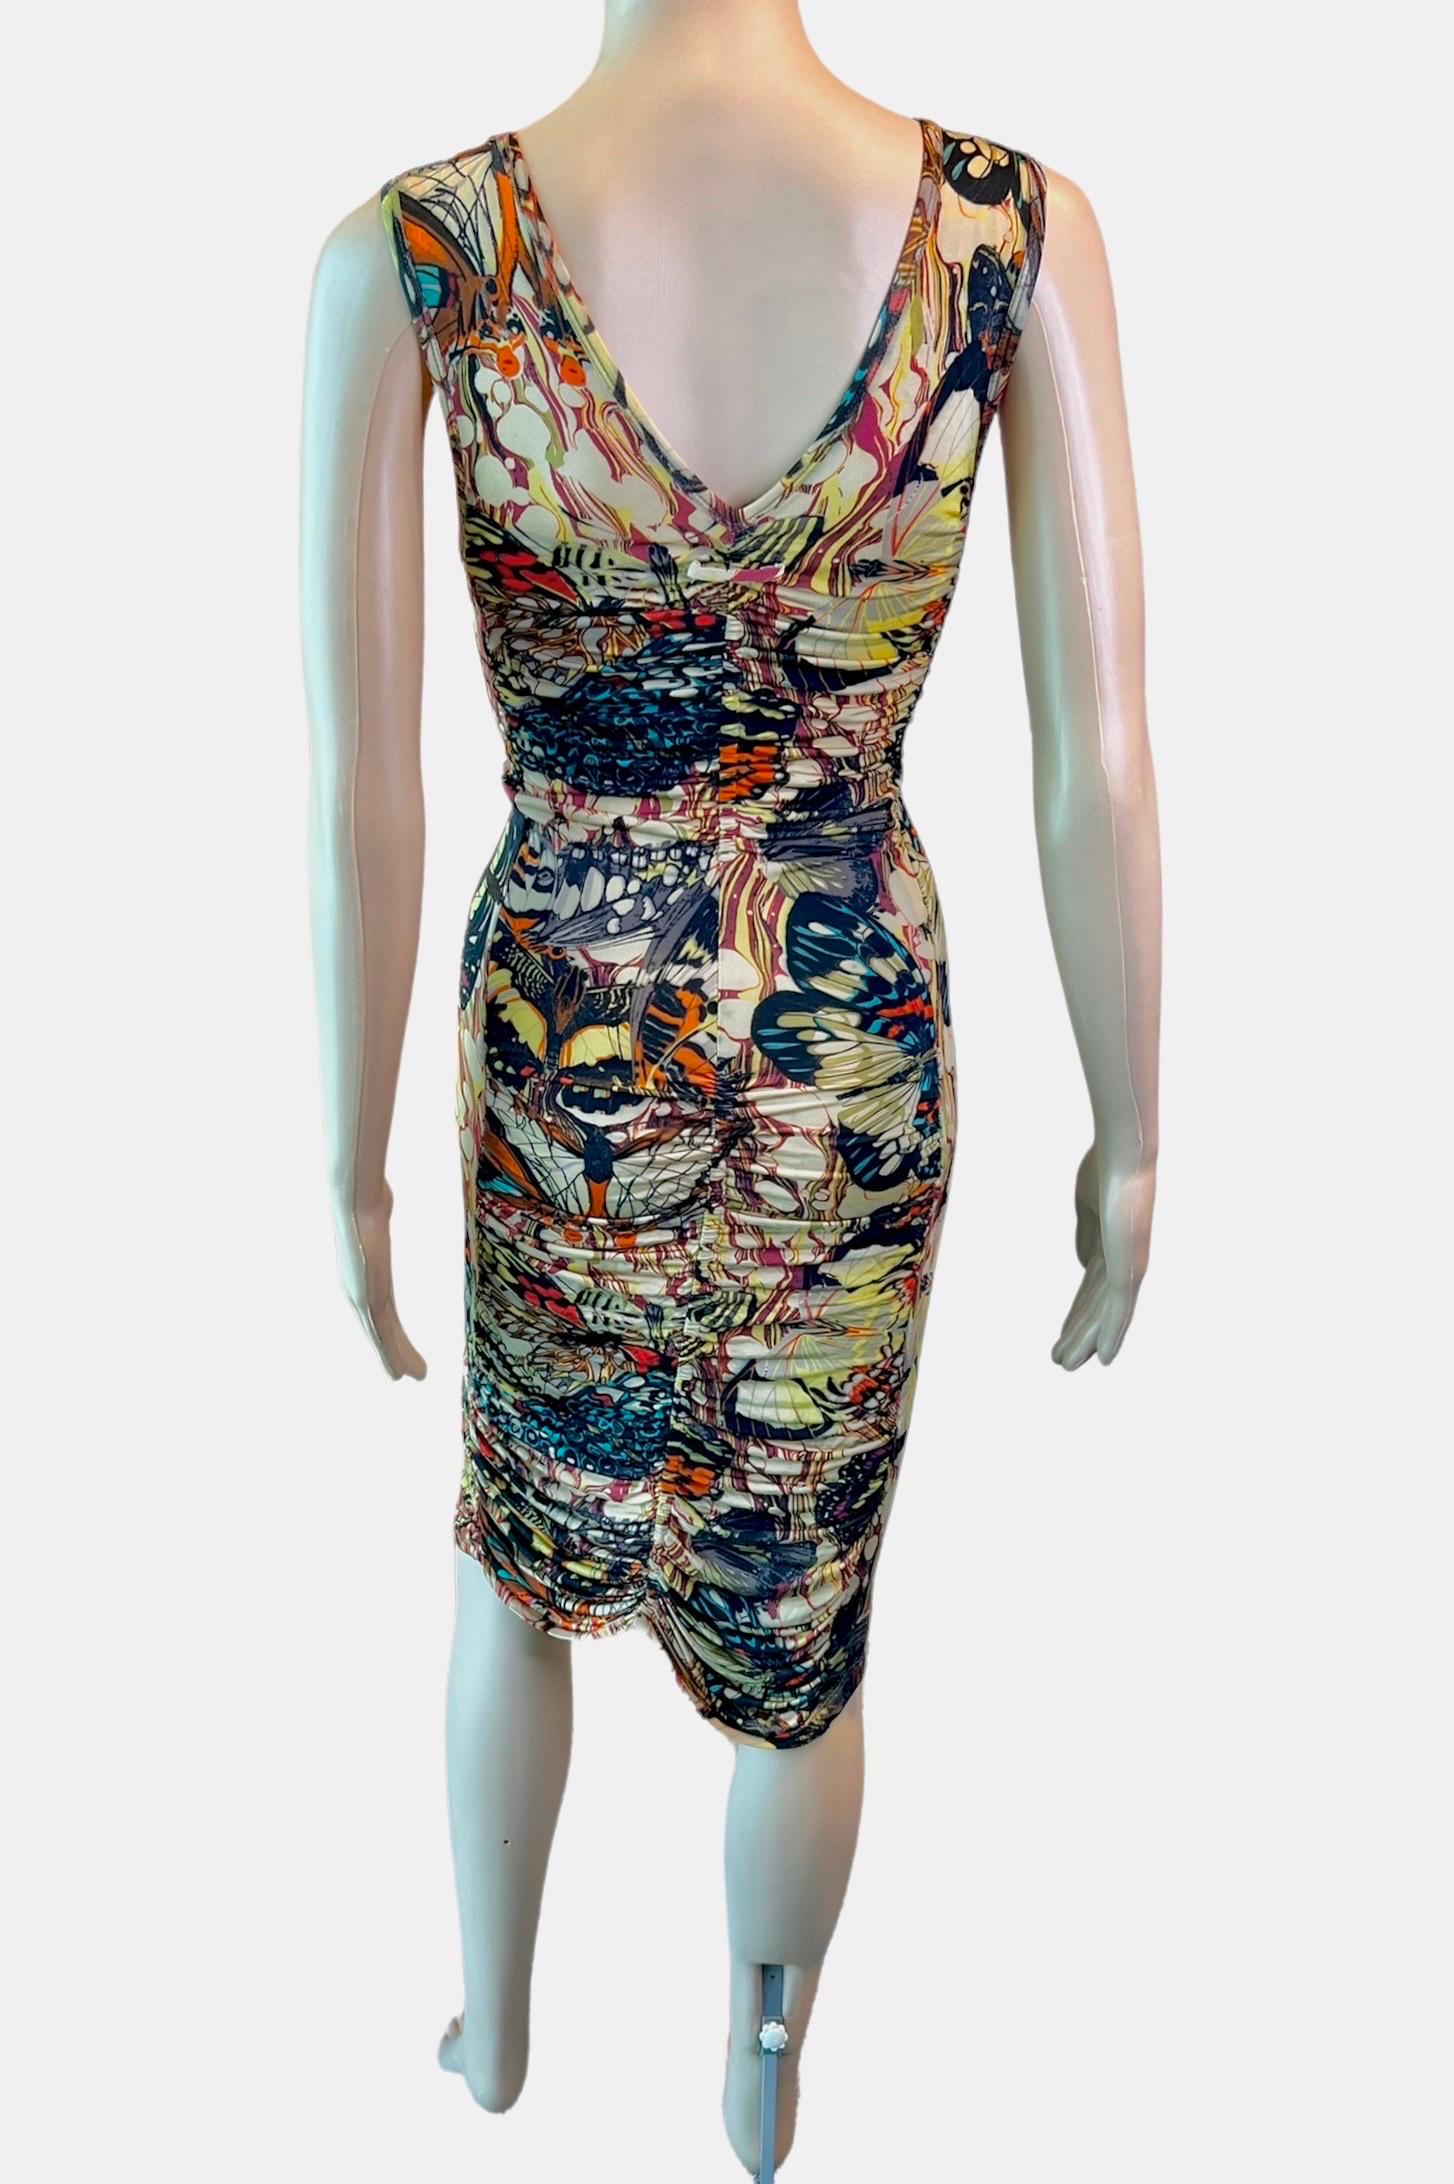 Jean Paul Gaultier Soleil S/S 2003 Butterfly Print Ruched Bodycon Mini Dress For Sale 1